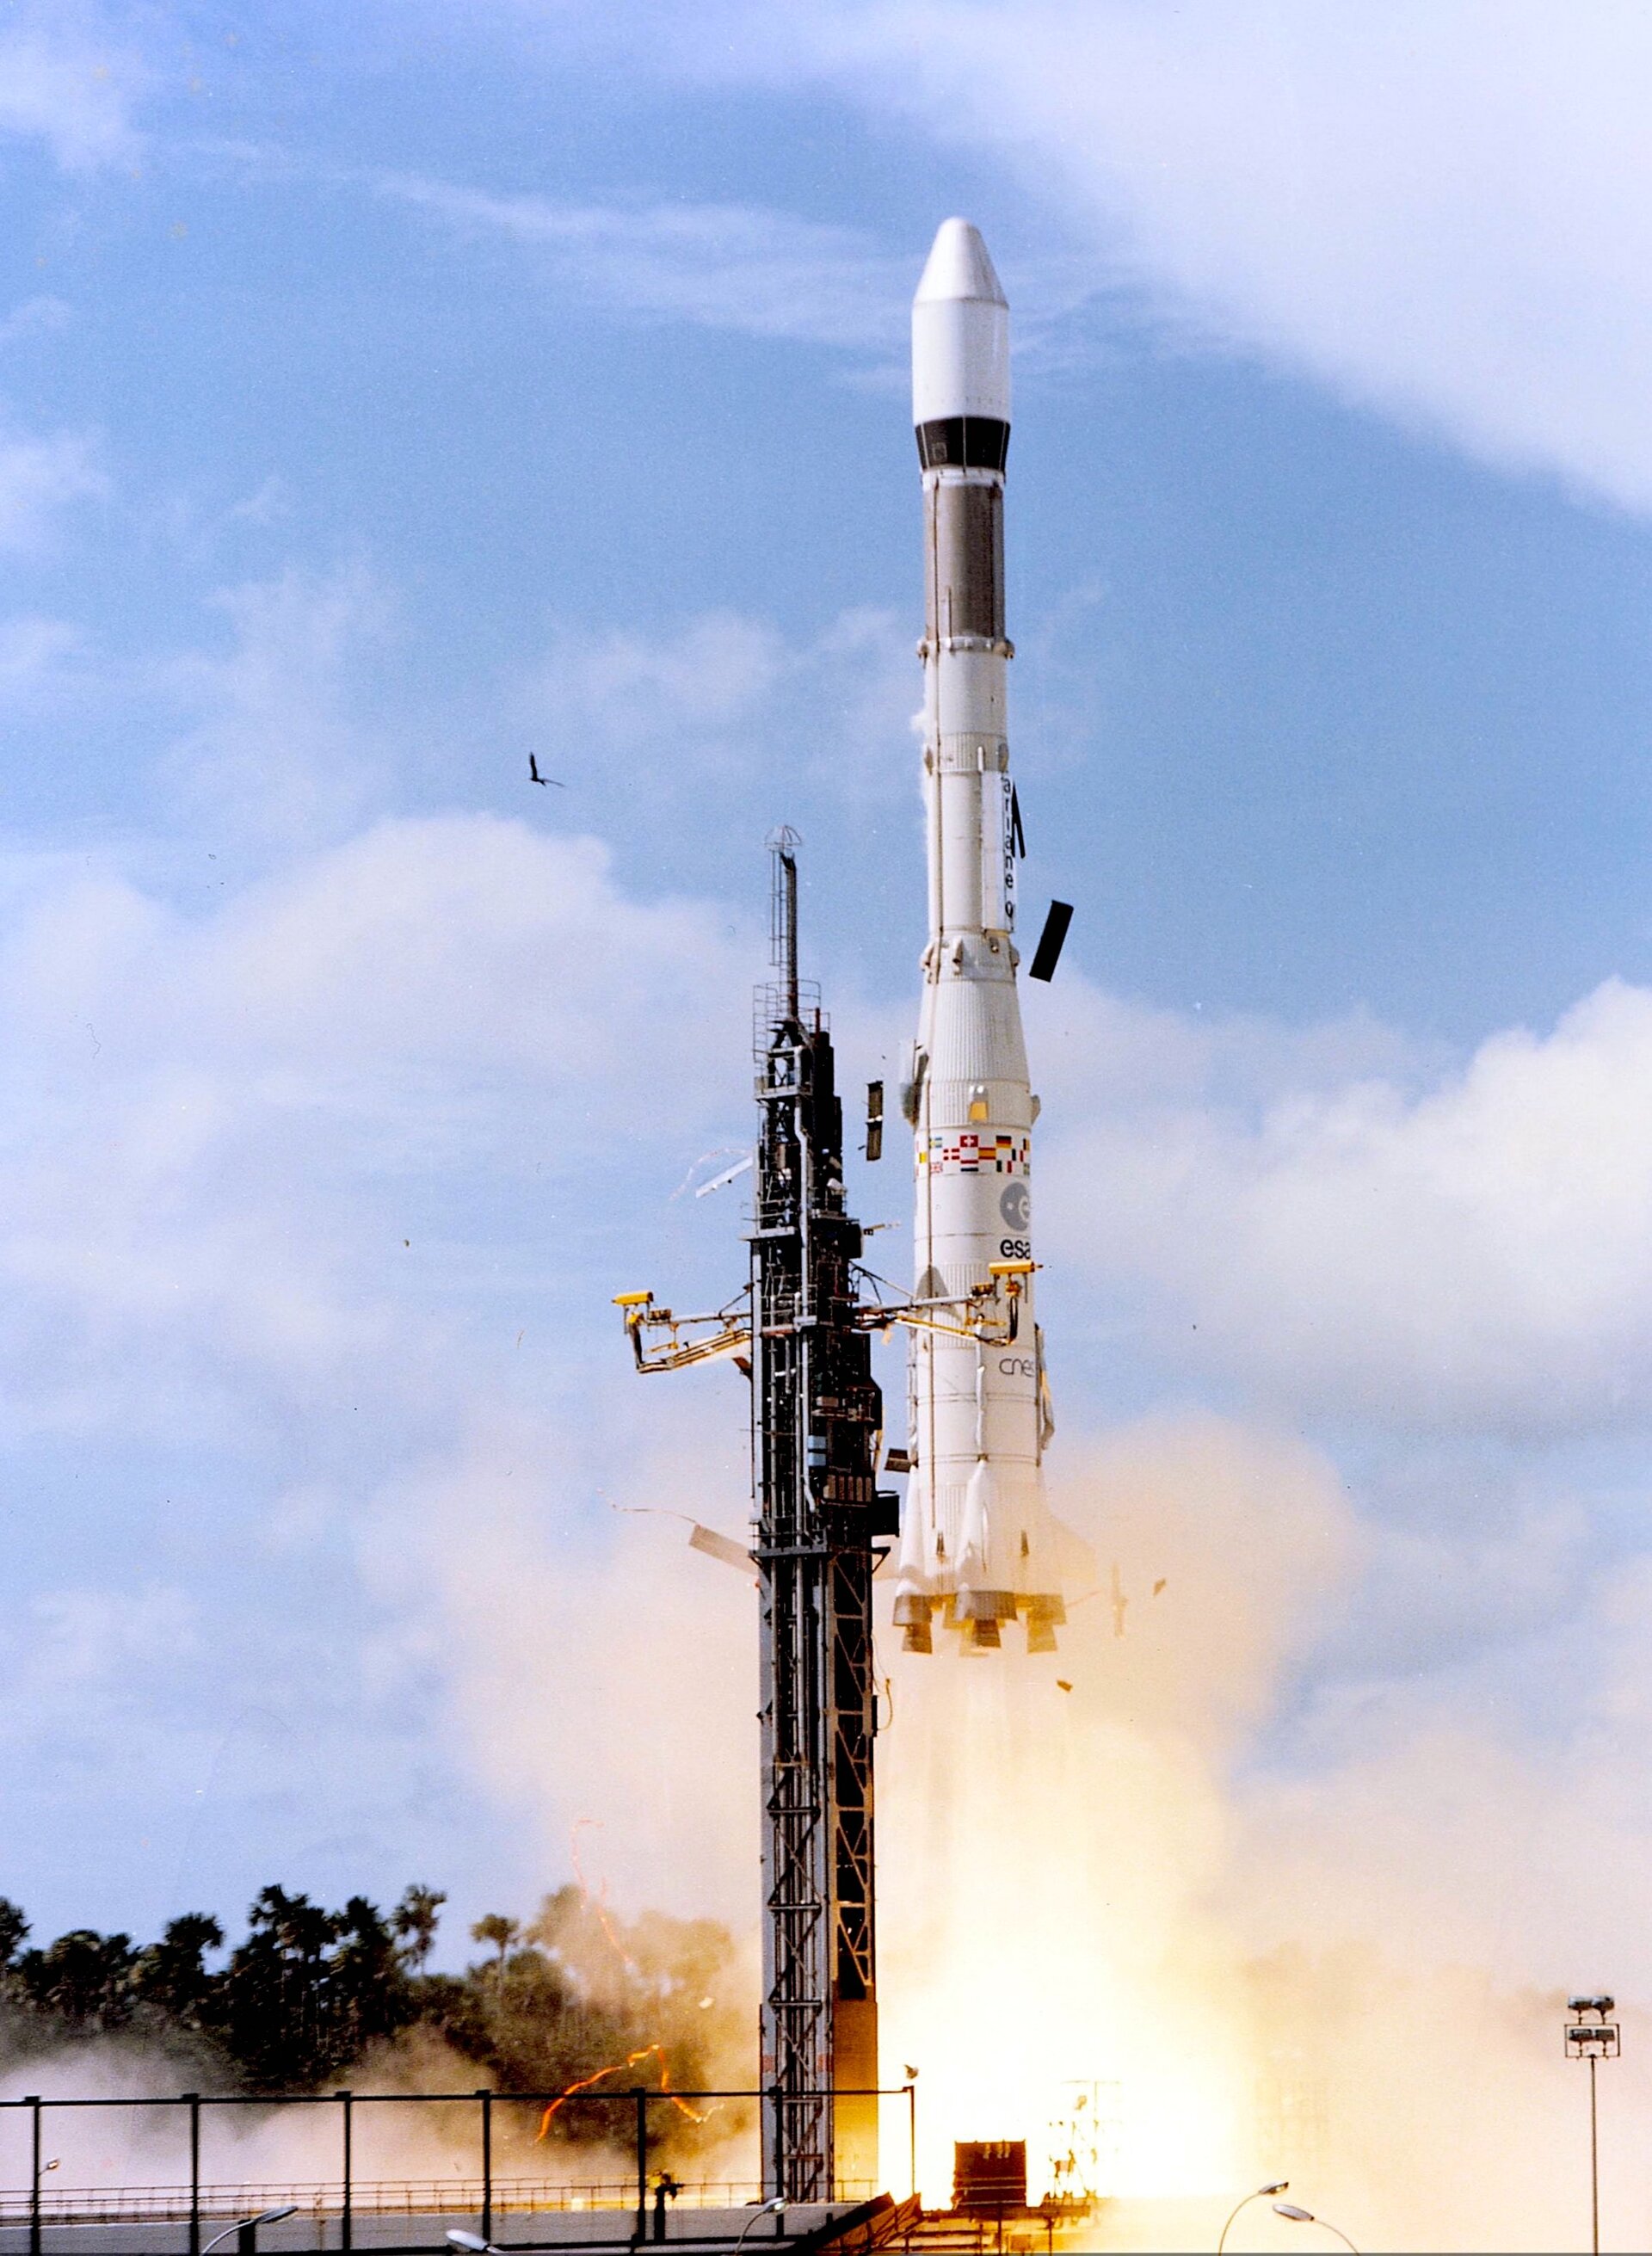 The first Ariane launch